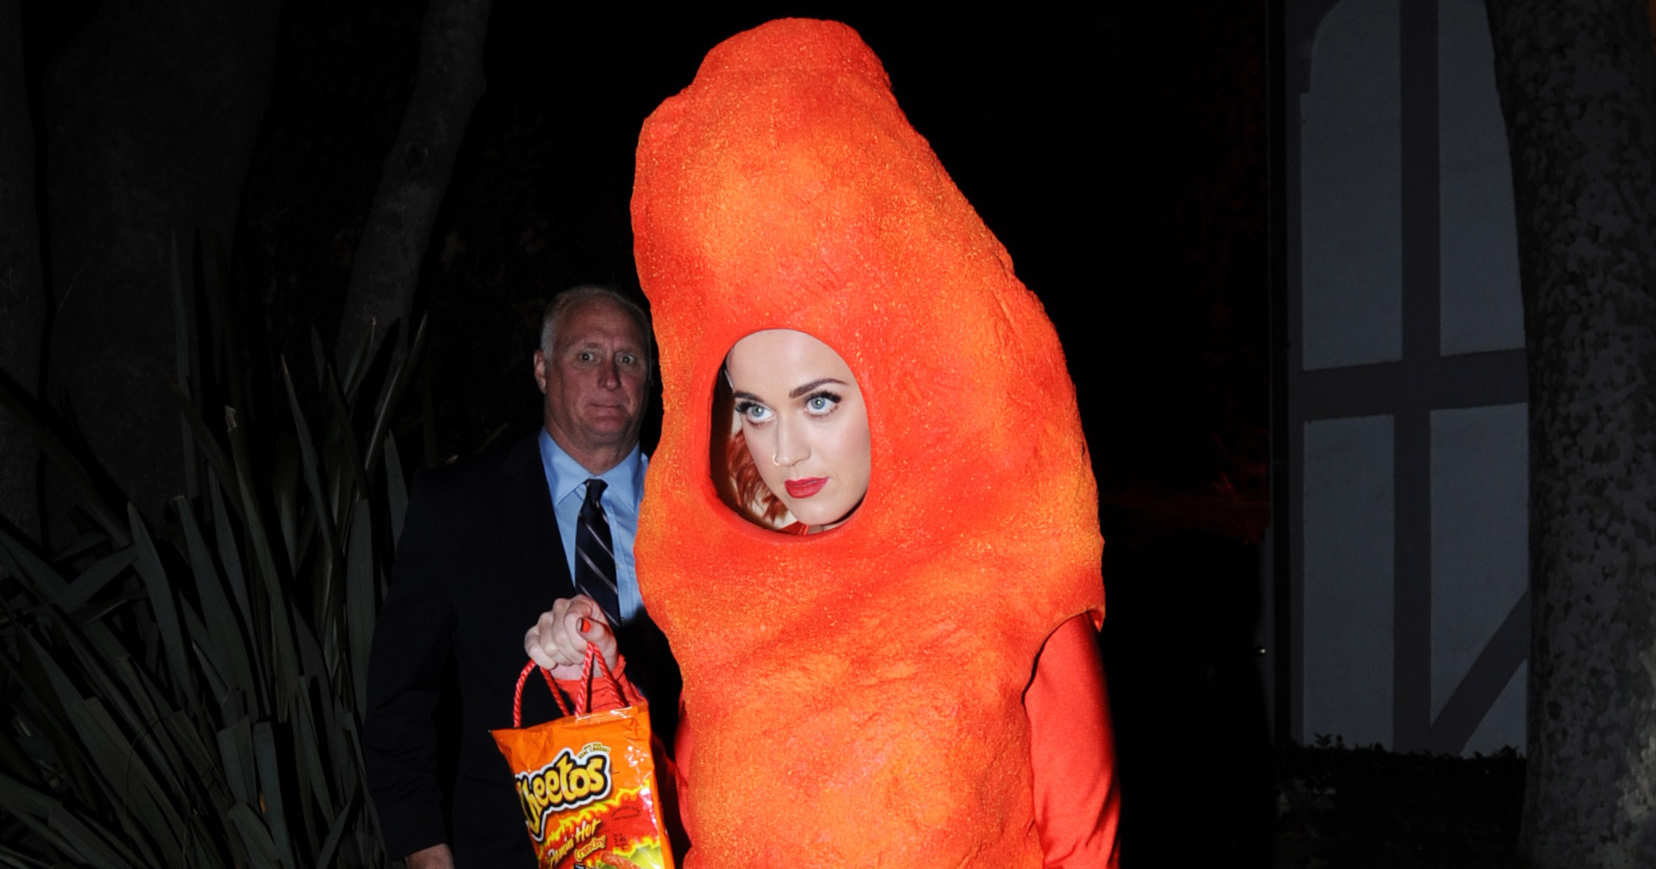 Katy Perry Channels Her Inner Cheeto & Celebrities Go All Out for Halloween!